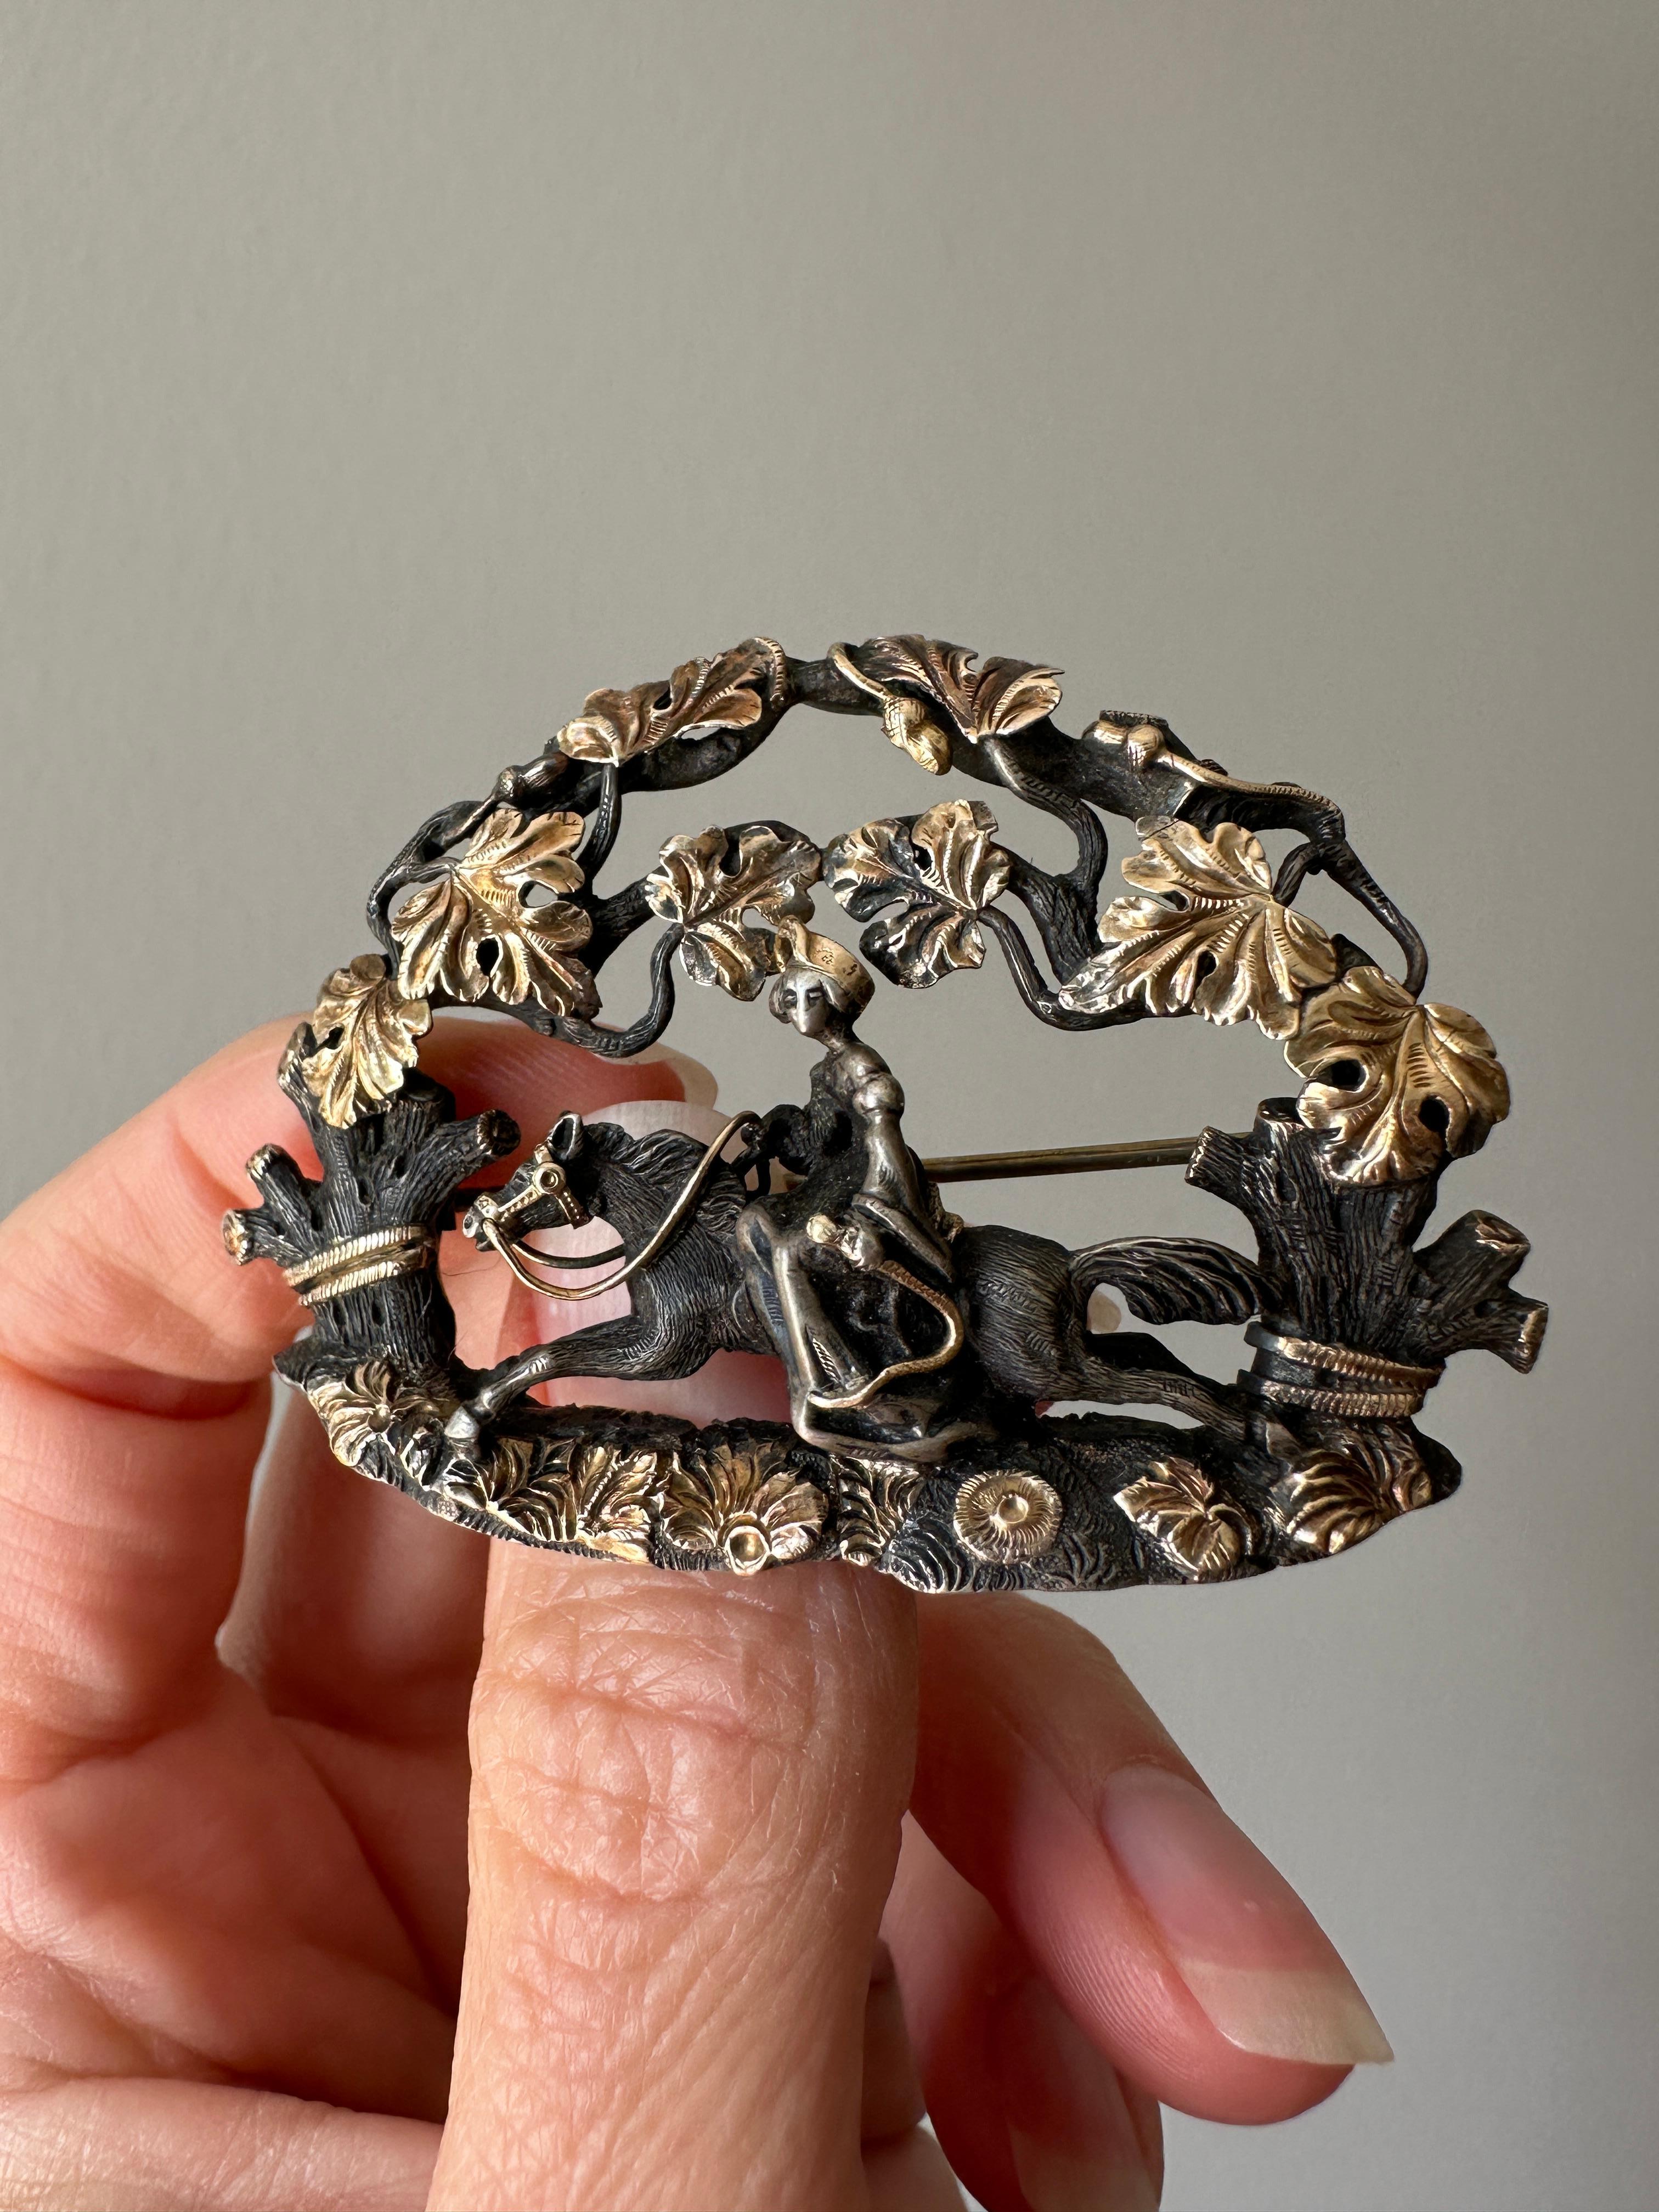 Antique Renaissance Revival Gold and Silver Brooch after Froment Meurice In Good Condition For Sale In Hummelstown, PA